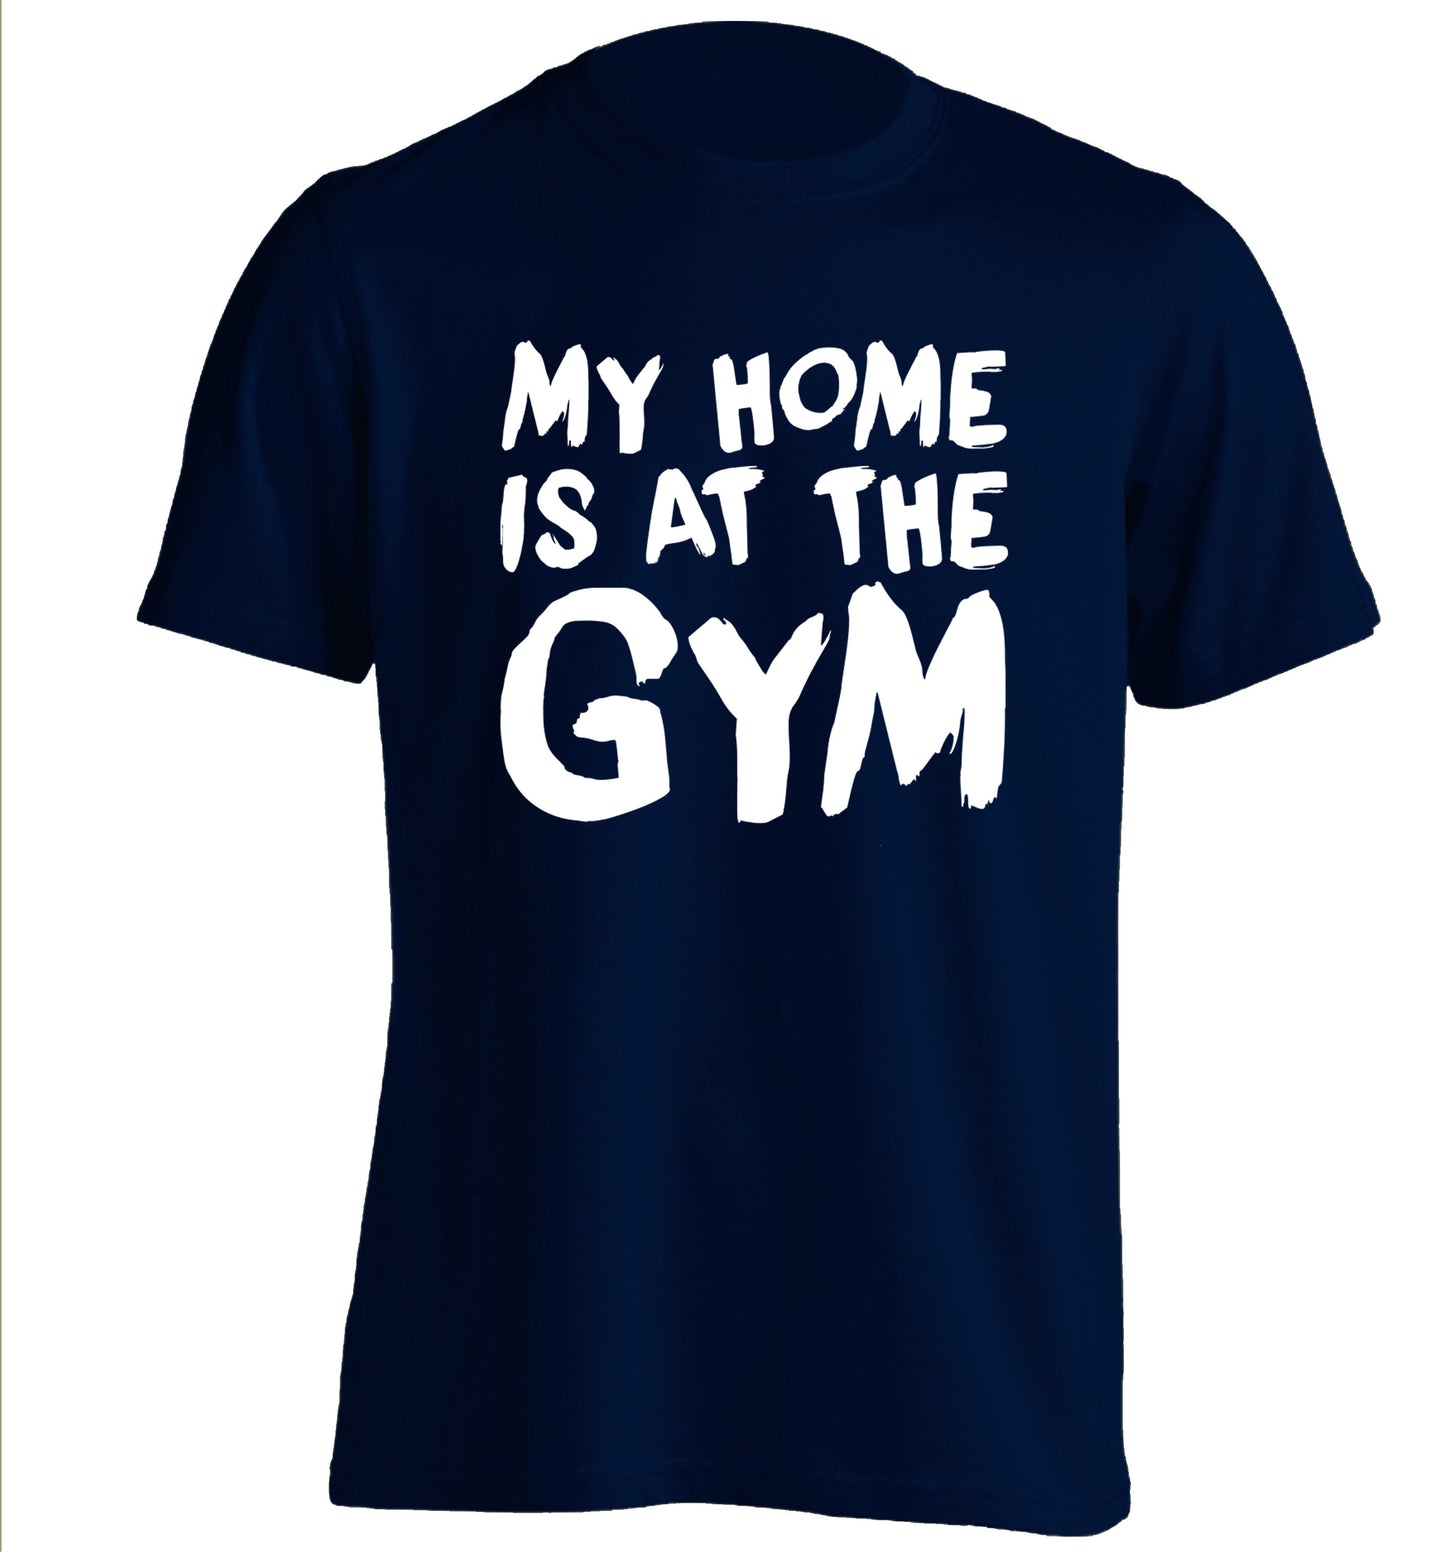 My home is at the gym adults unisex navy Tshirt 2XL